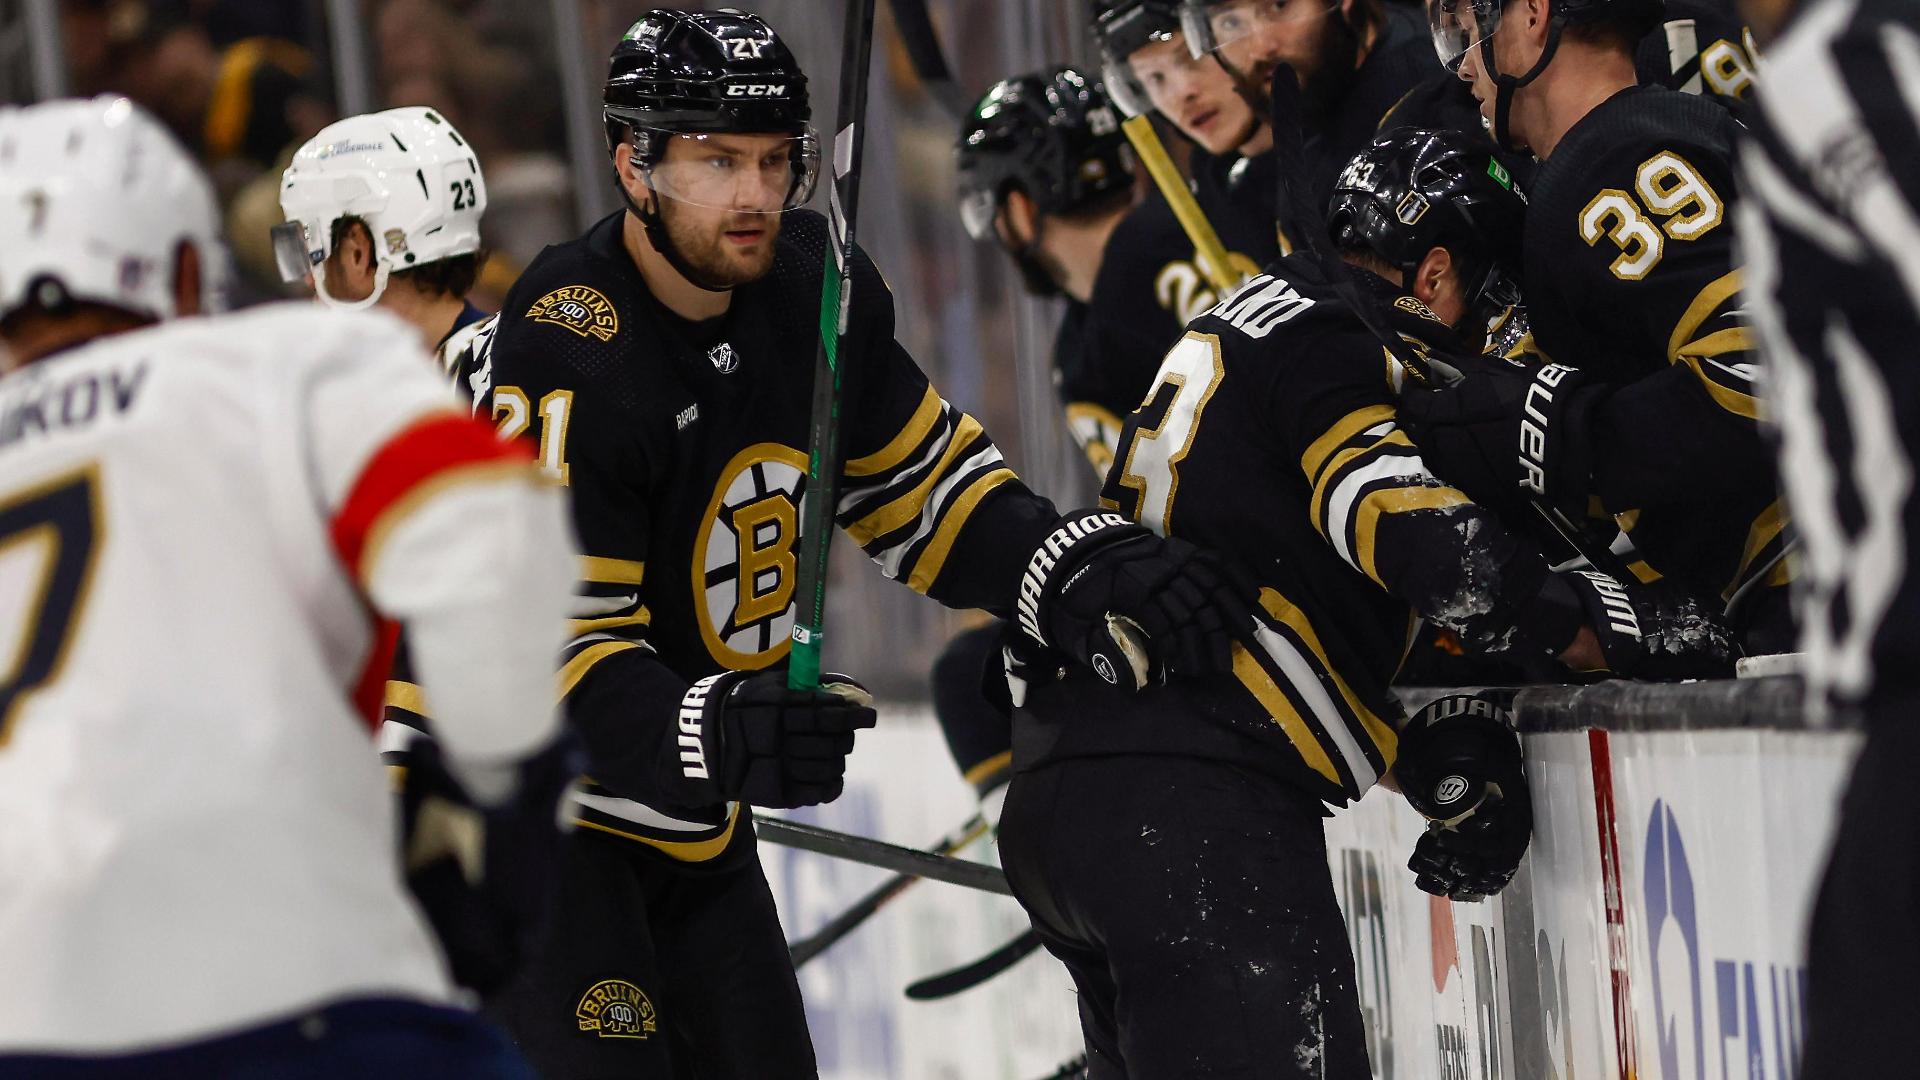 Bruins' Brad Marchand takes ice for Game 6 vs. Panthers